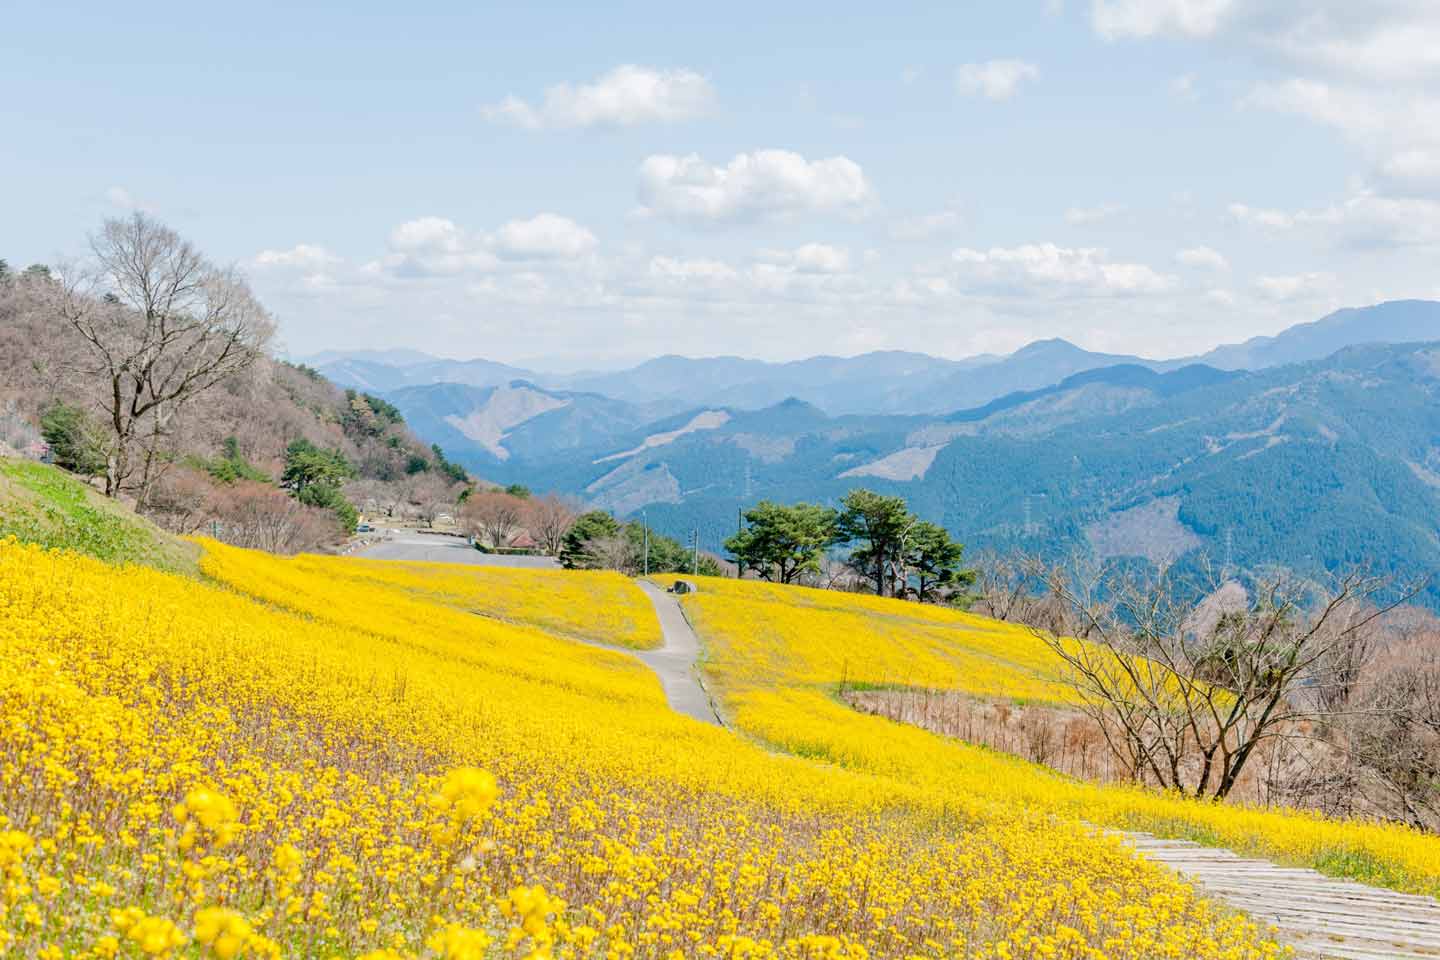 8 Recommended Sightseeing Spots to Visit in Ehime